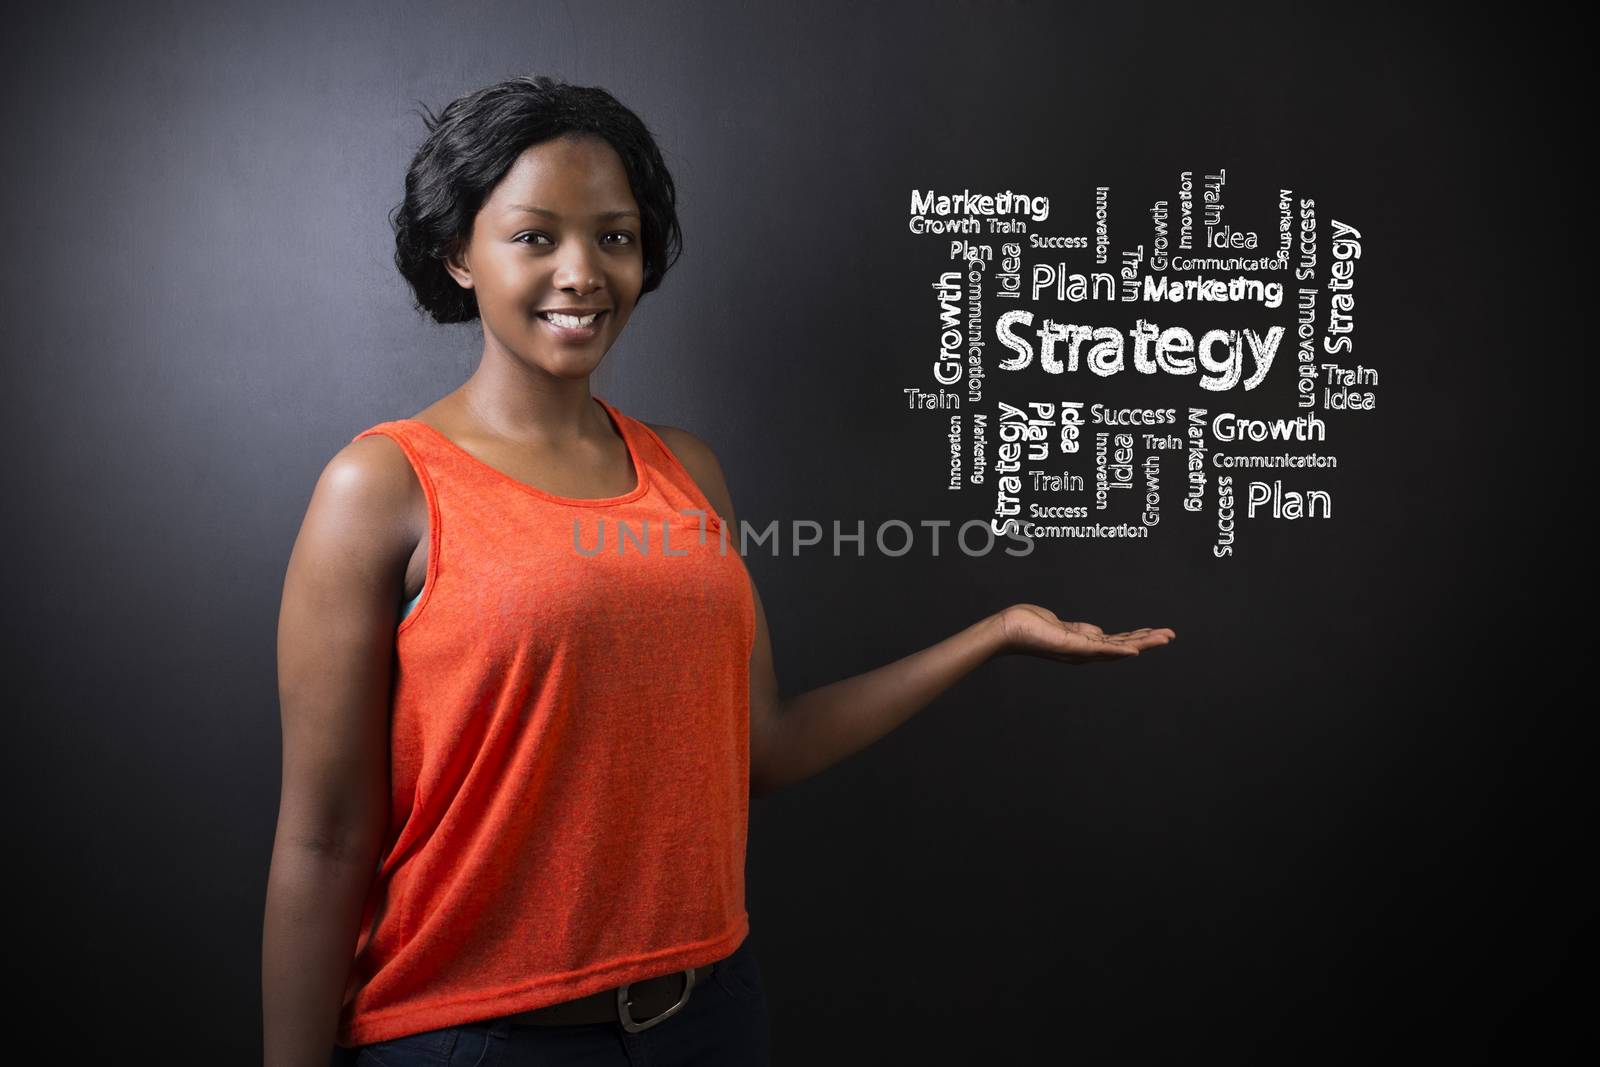 South African or African American woman teacher or student holding hand out against a blackboard background with a chalk strategy diagram